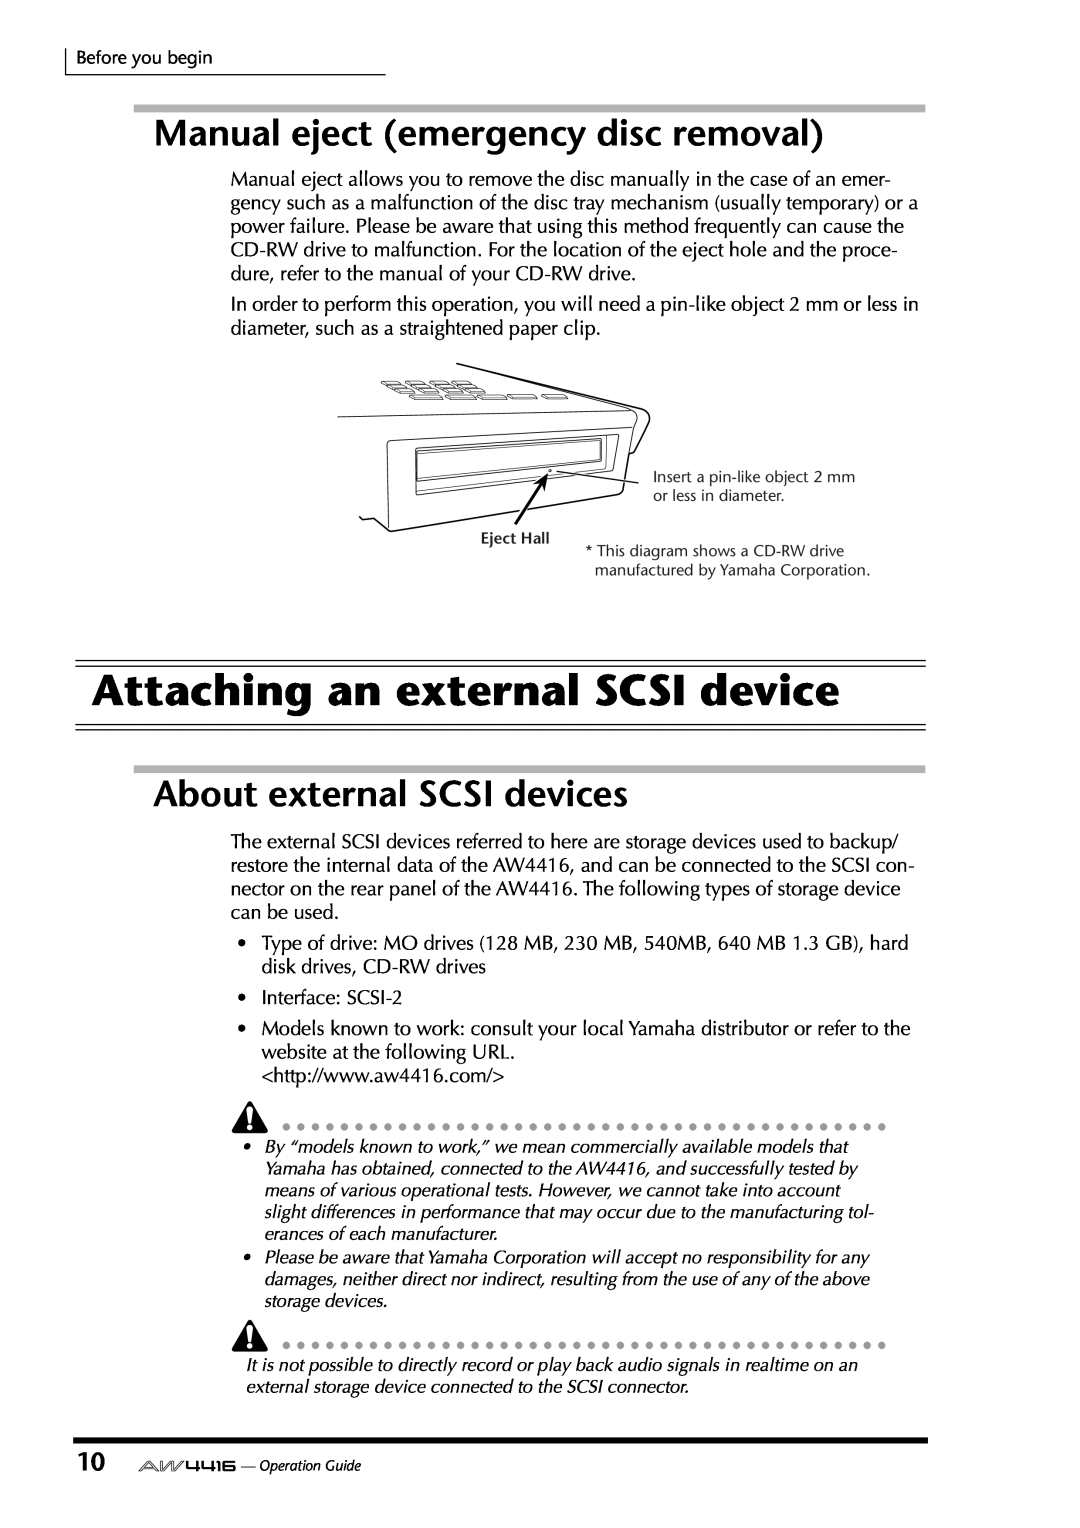 Yamaha AW4416 manual Attaching an external SCSI device, Manual eject emergency disc removal, About external SCSI devices 